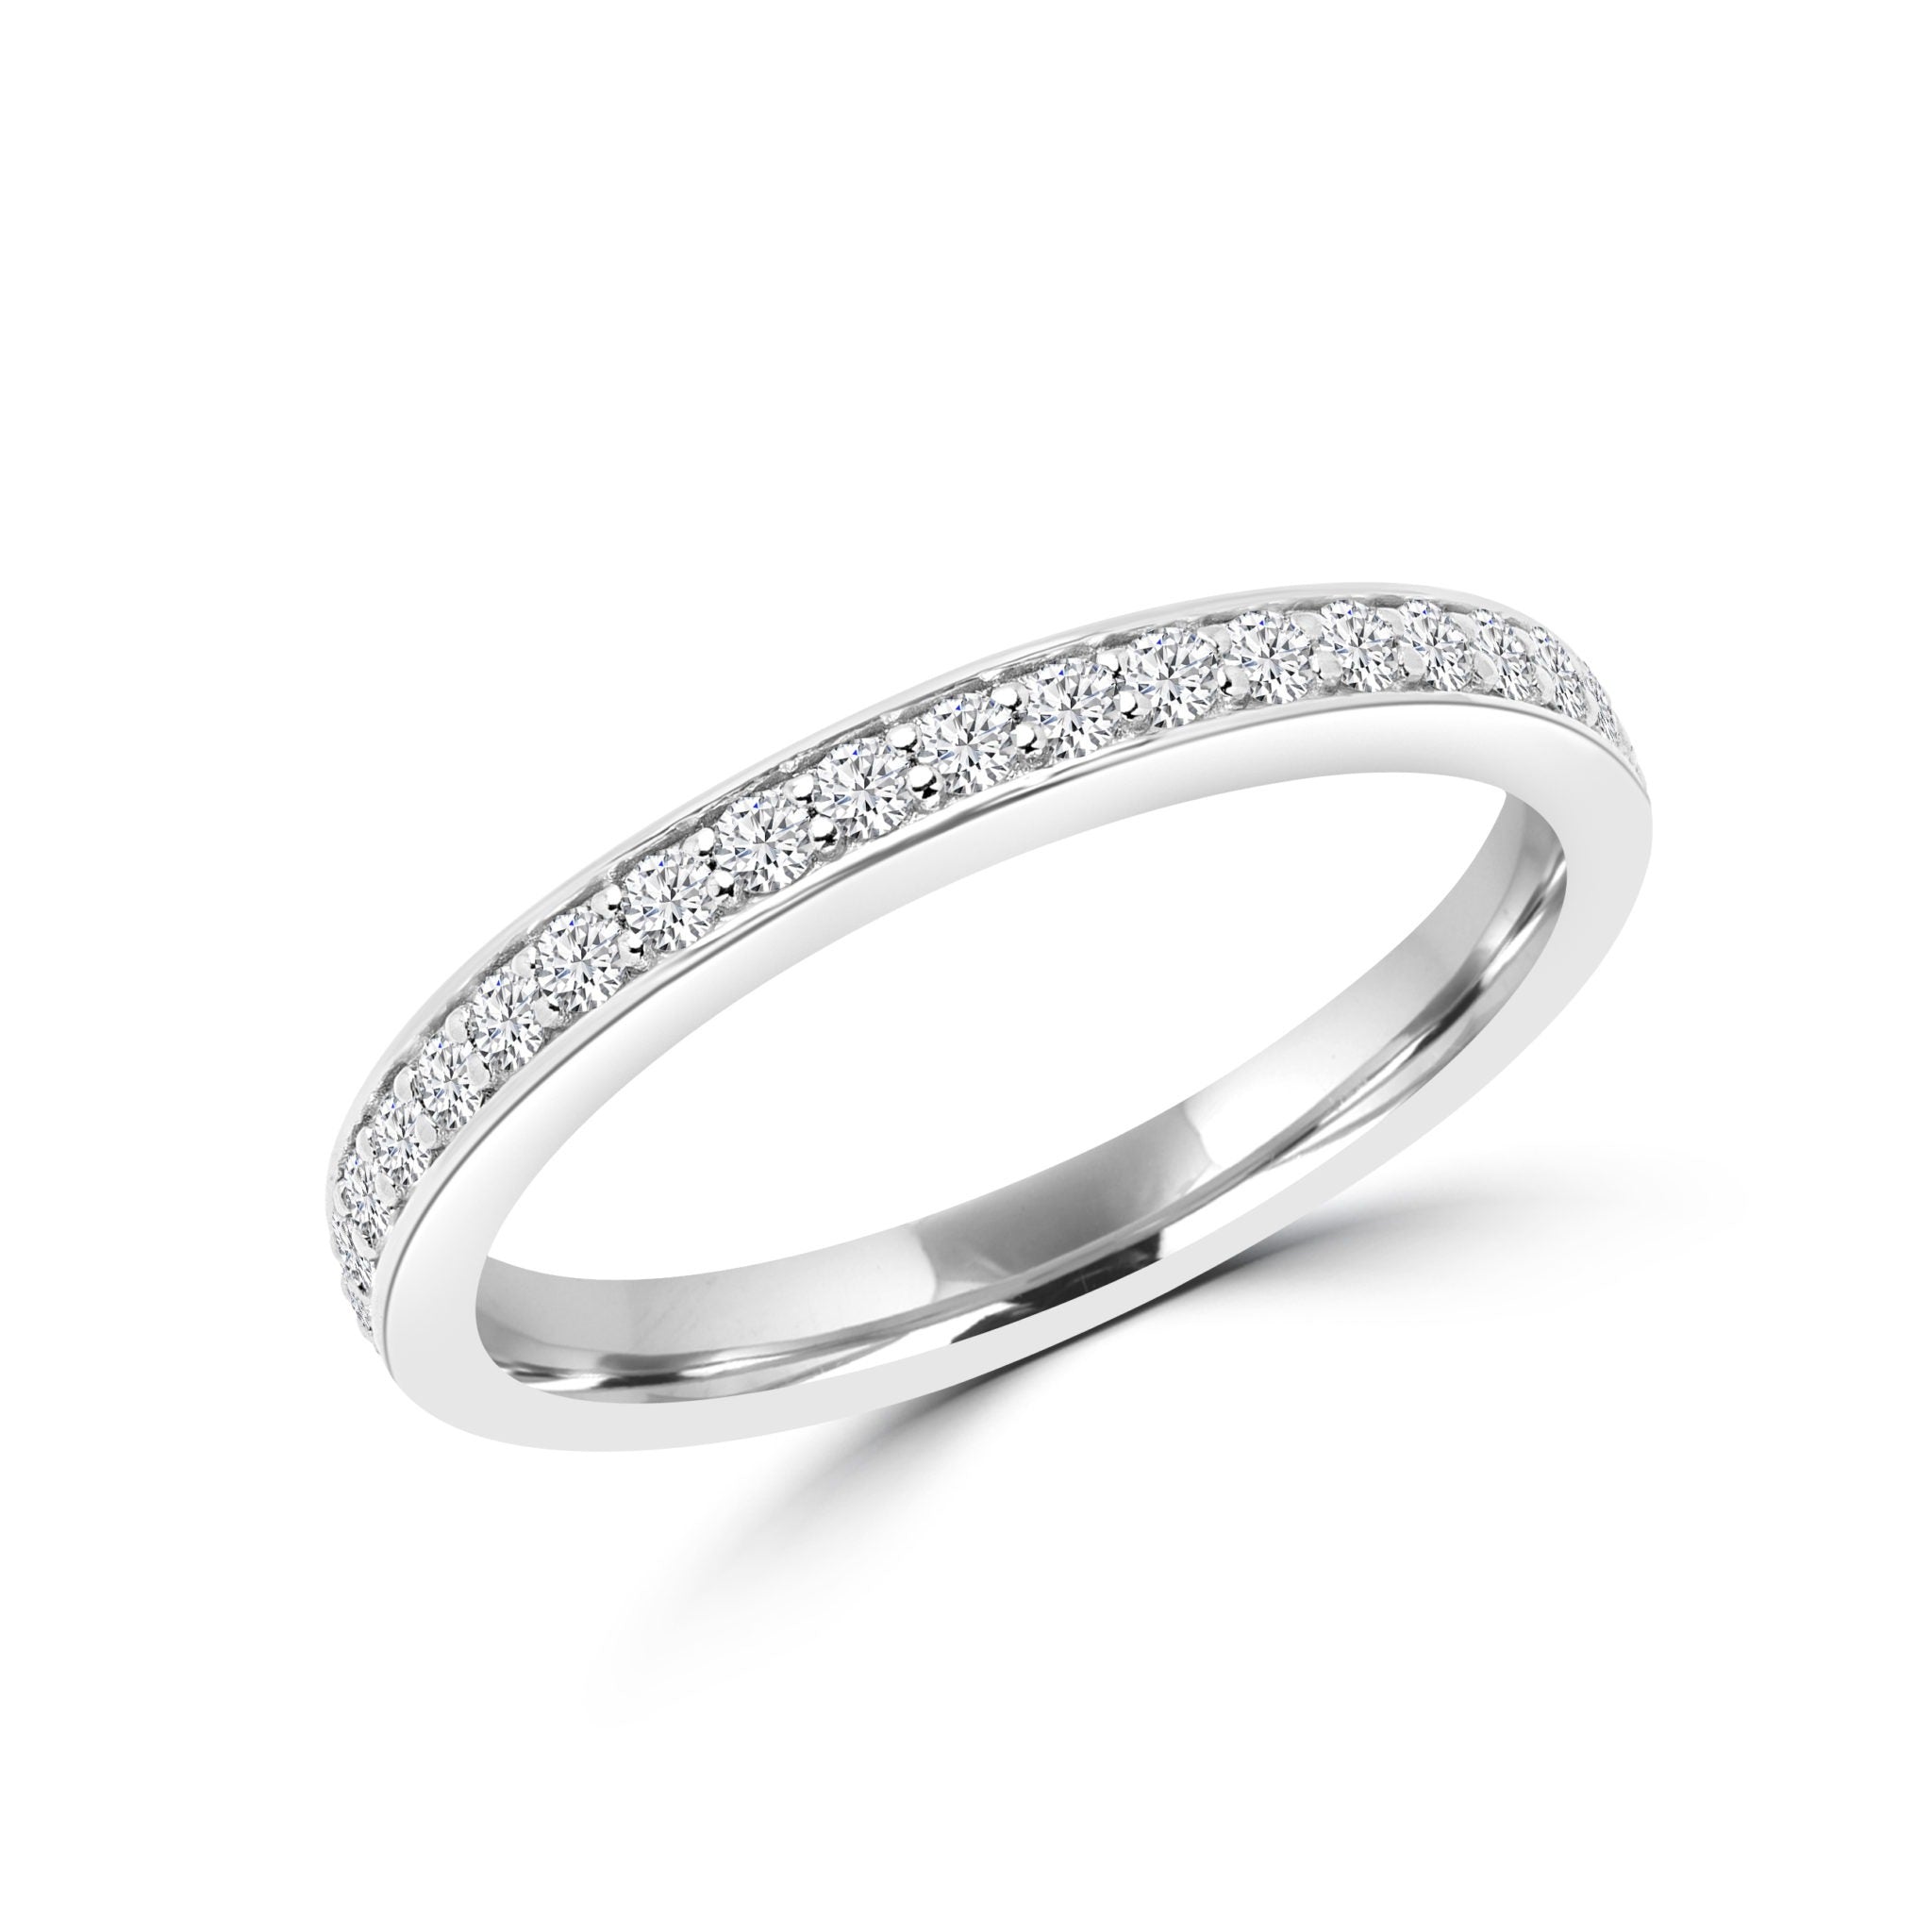 Semi-eternity affection ring 0.30 (ctw) in 14k gold